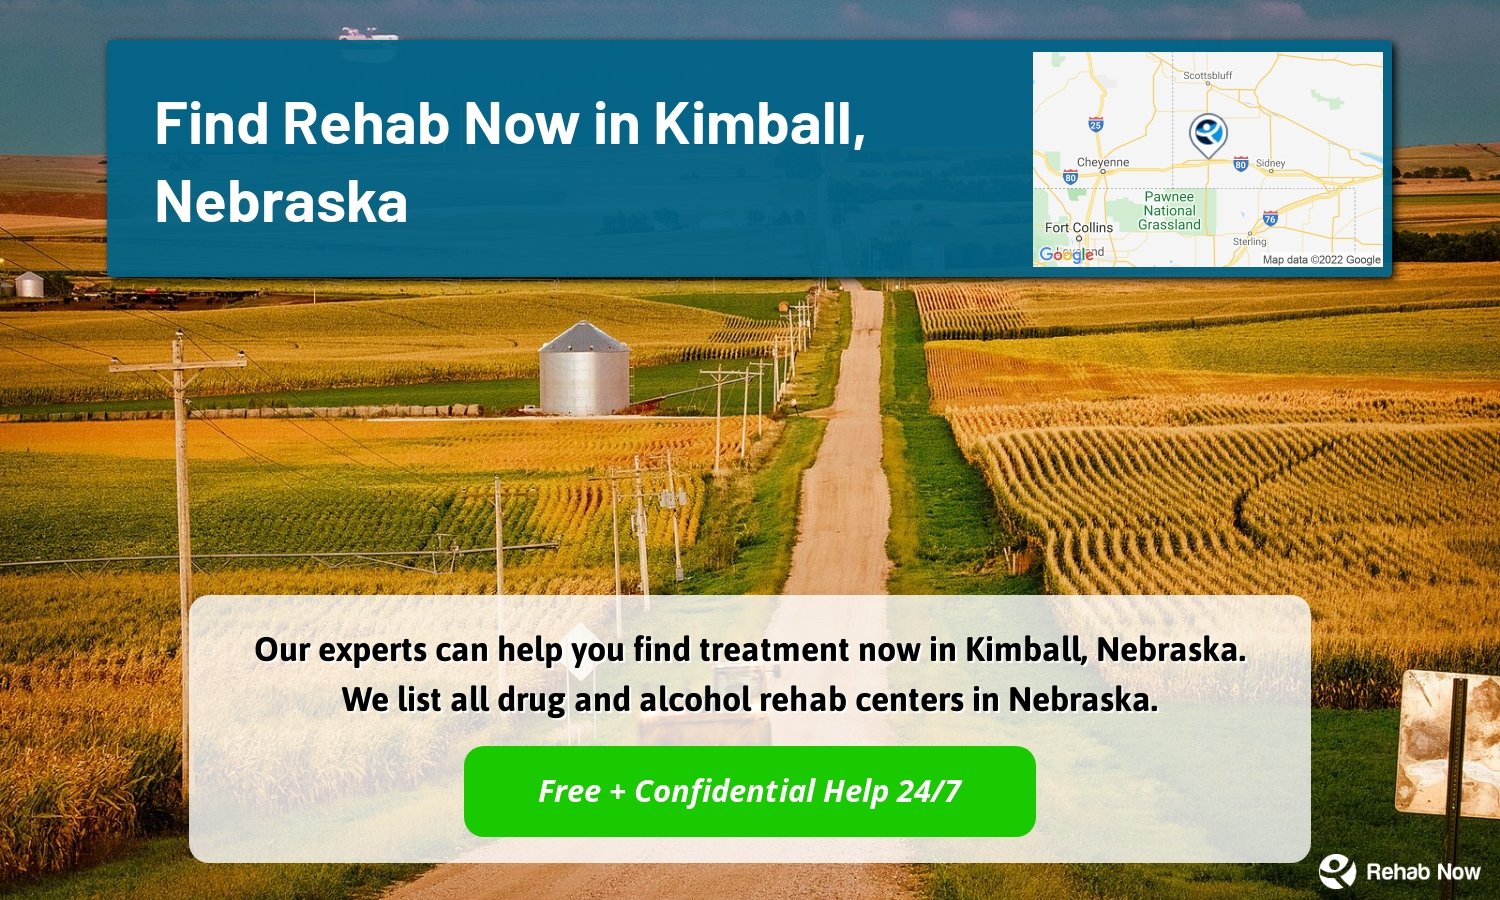 Our experts can help you find treatment now in Kimball, Nebraska. We list all drug and alcohol rehab centers in Nebraska.